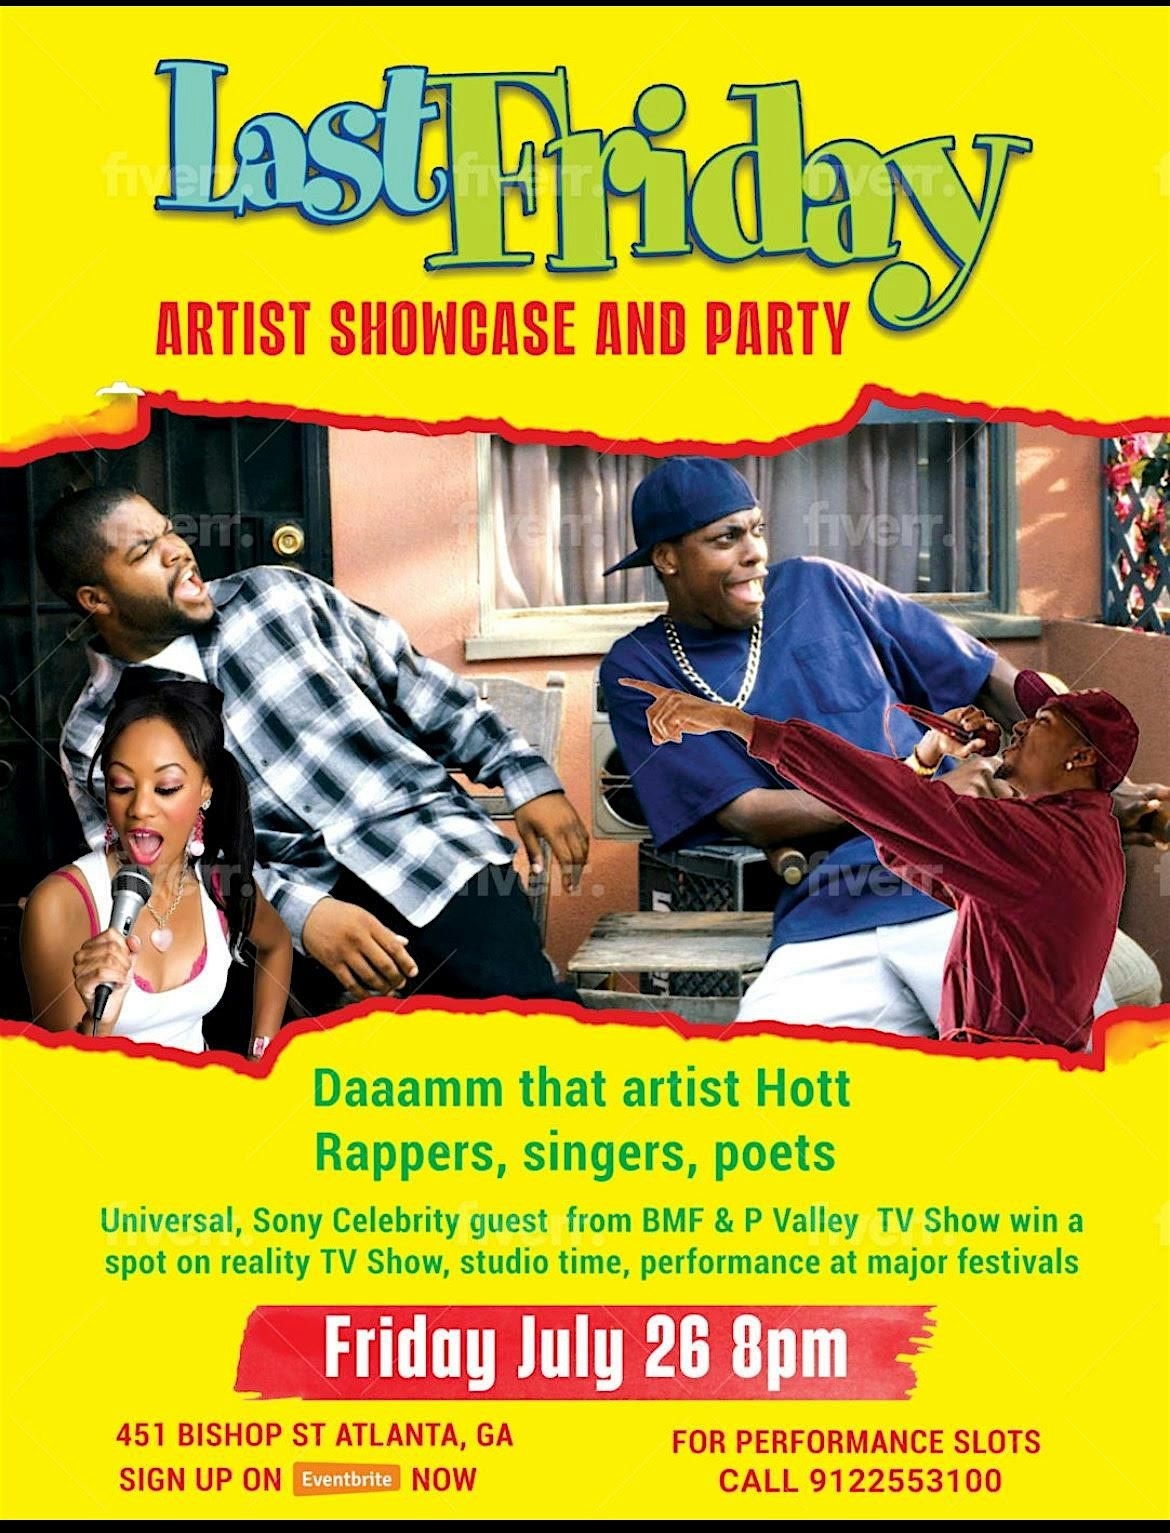 LAST FRIDAY ARTIST SHOWCASE AND PARTY